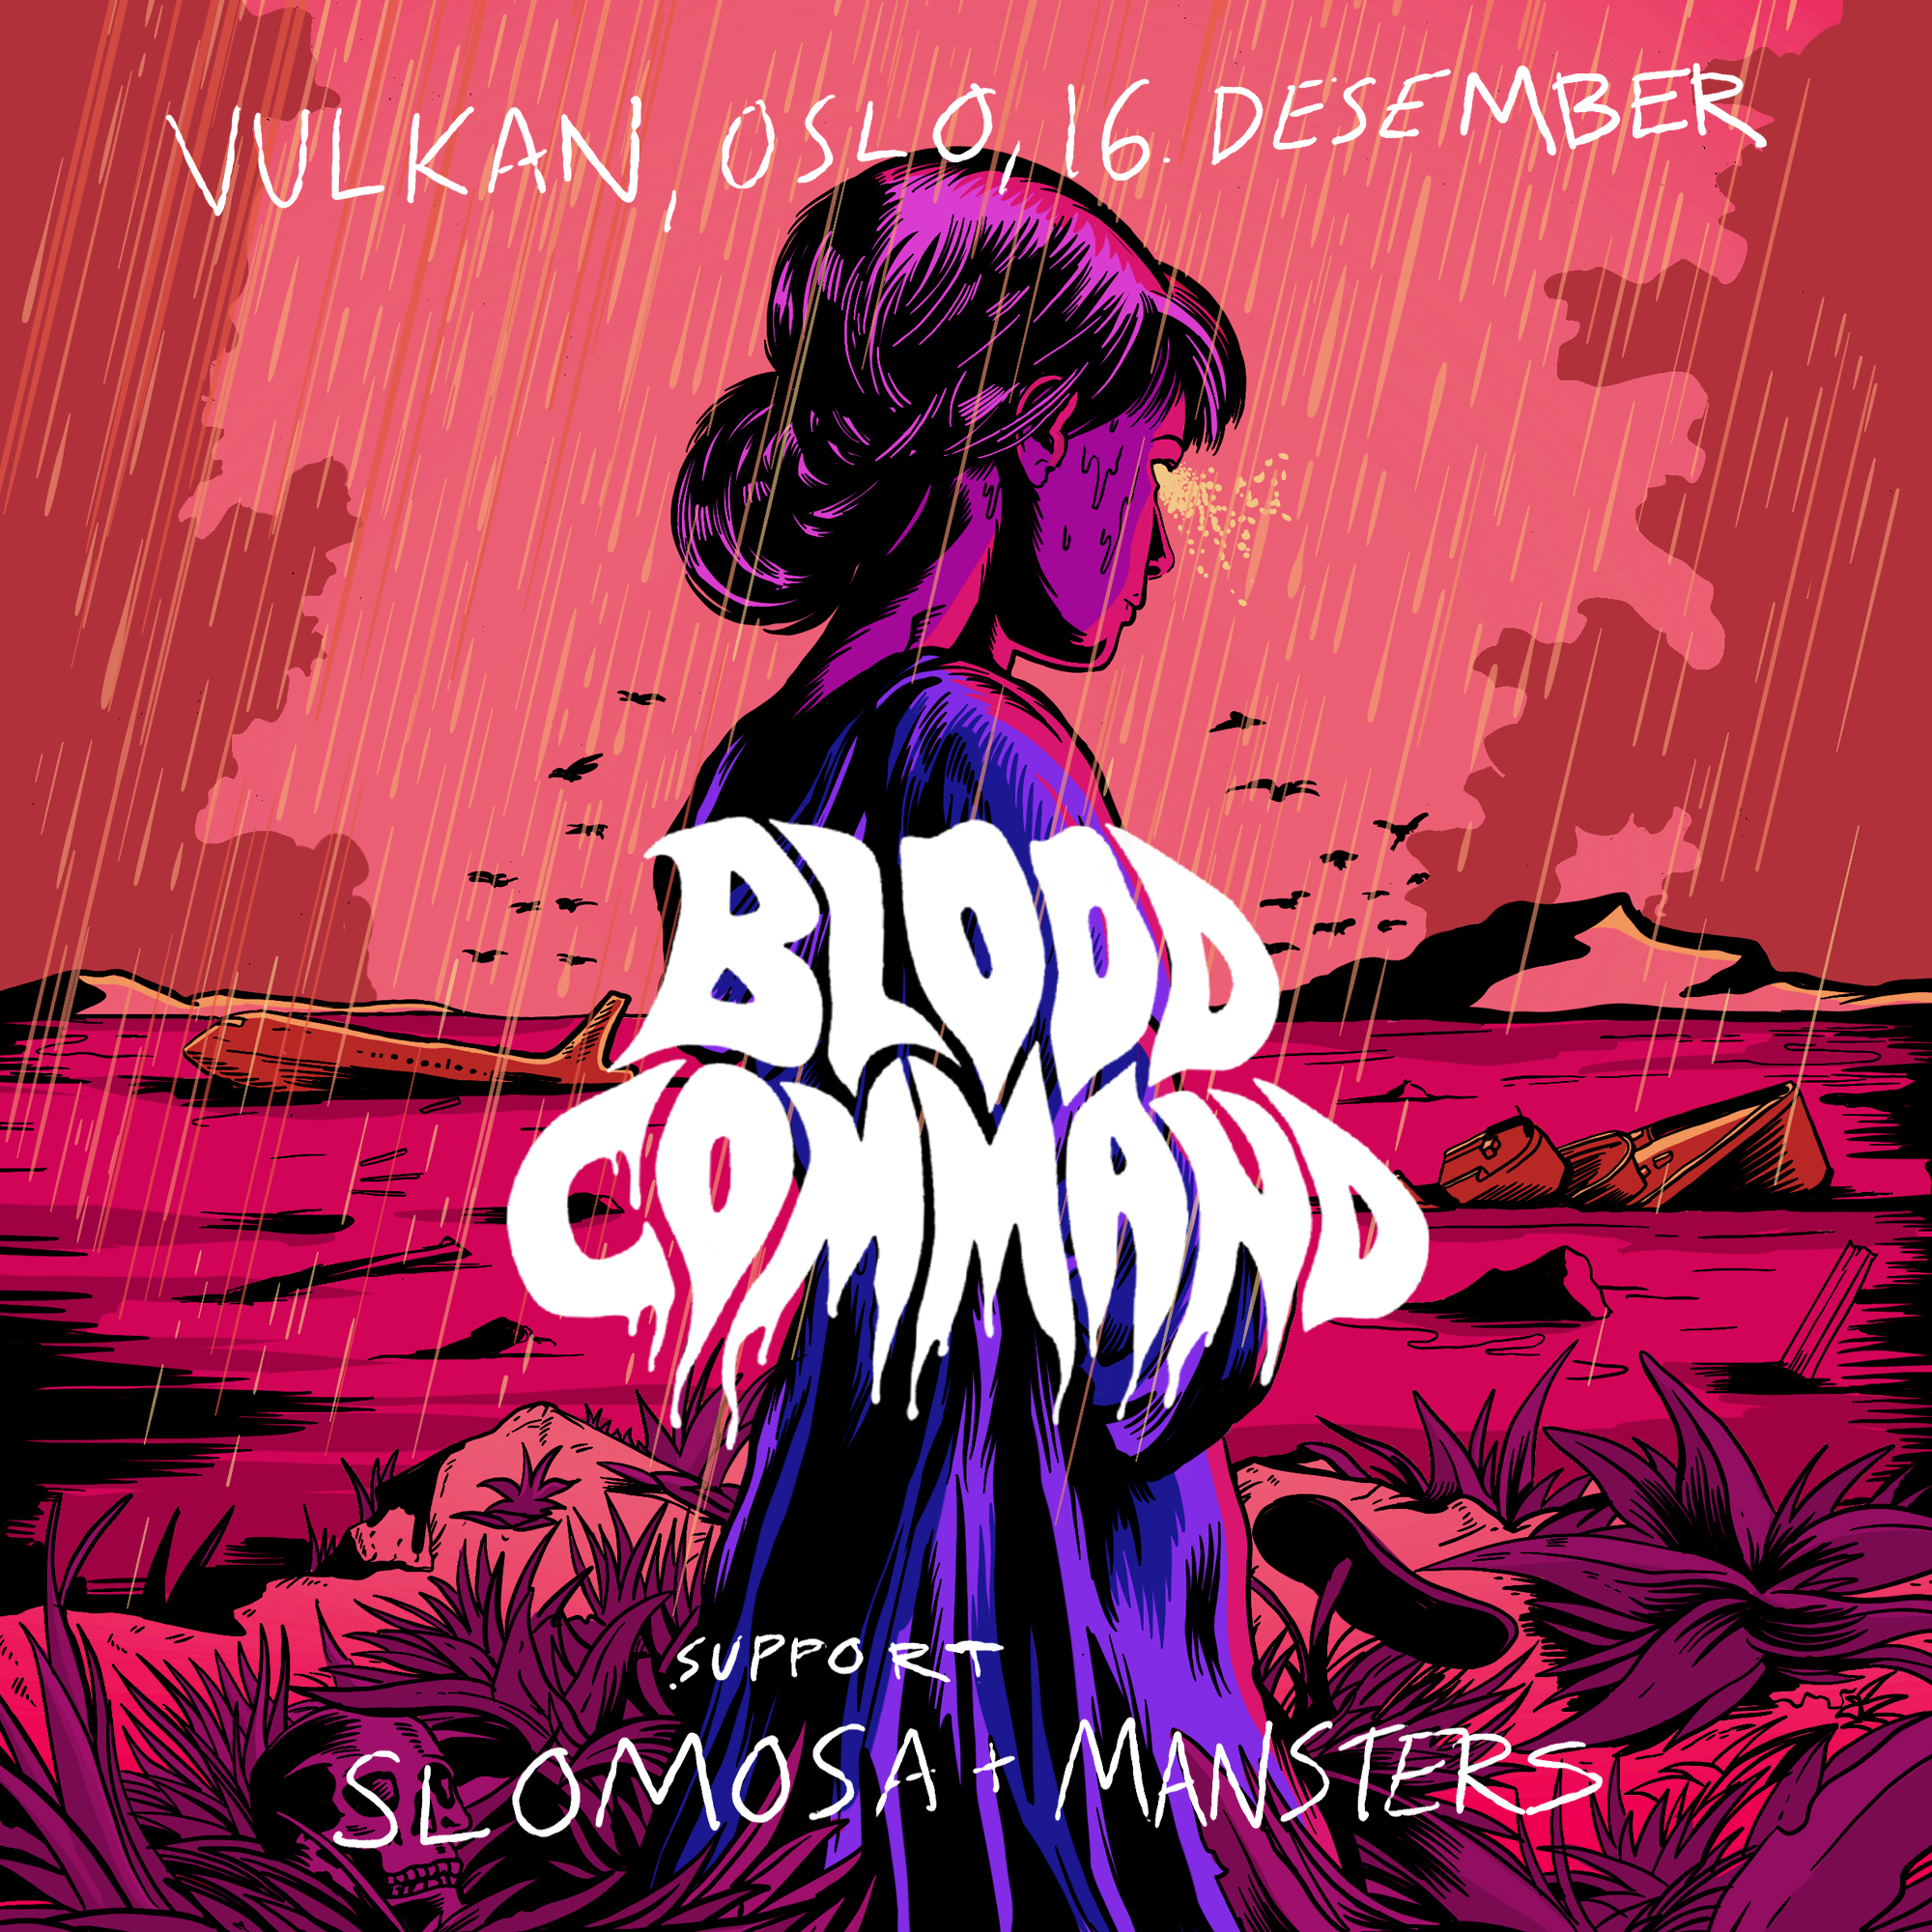 BLOOD COMMAND / SUPPORT SLOMOSA + MANSTERS